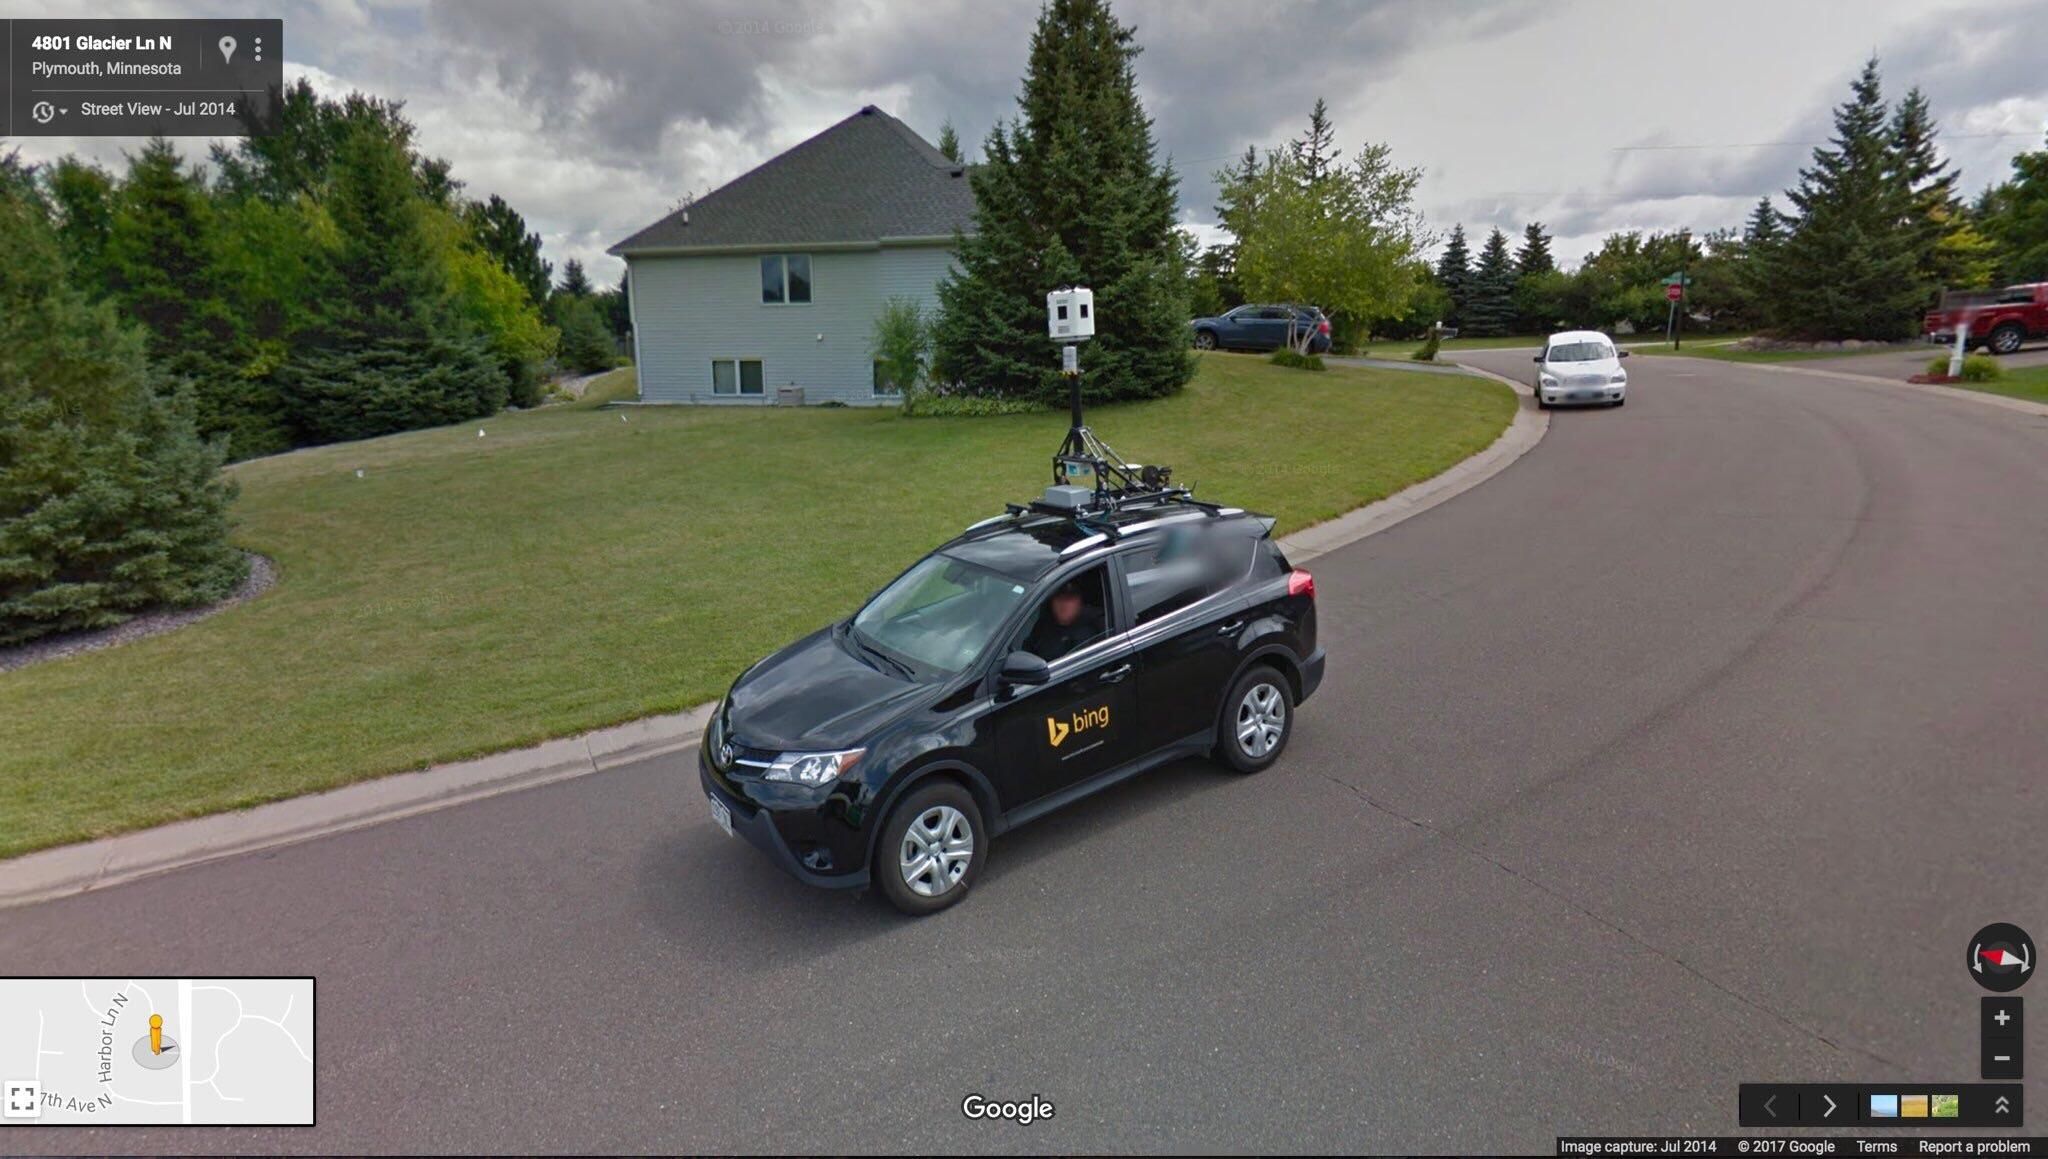 A google car and a bing car passed each other while recording